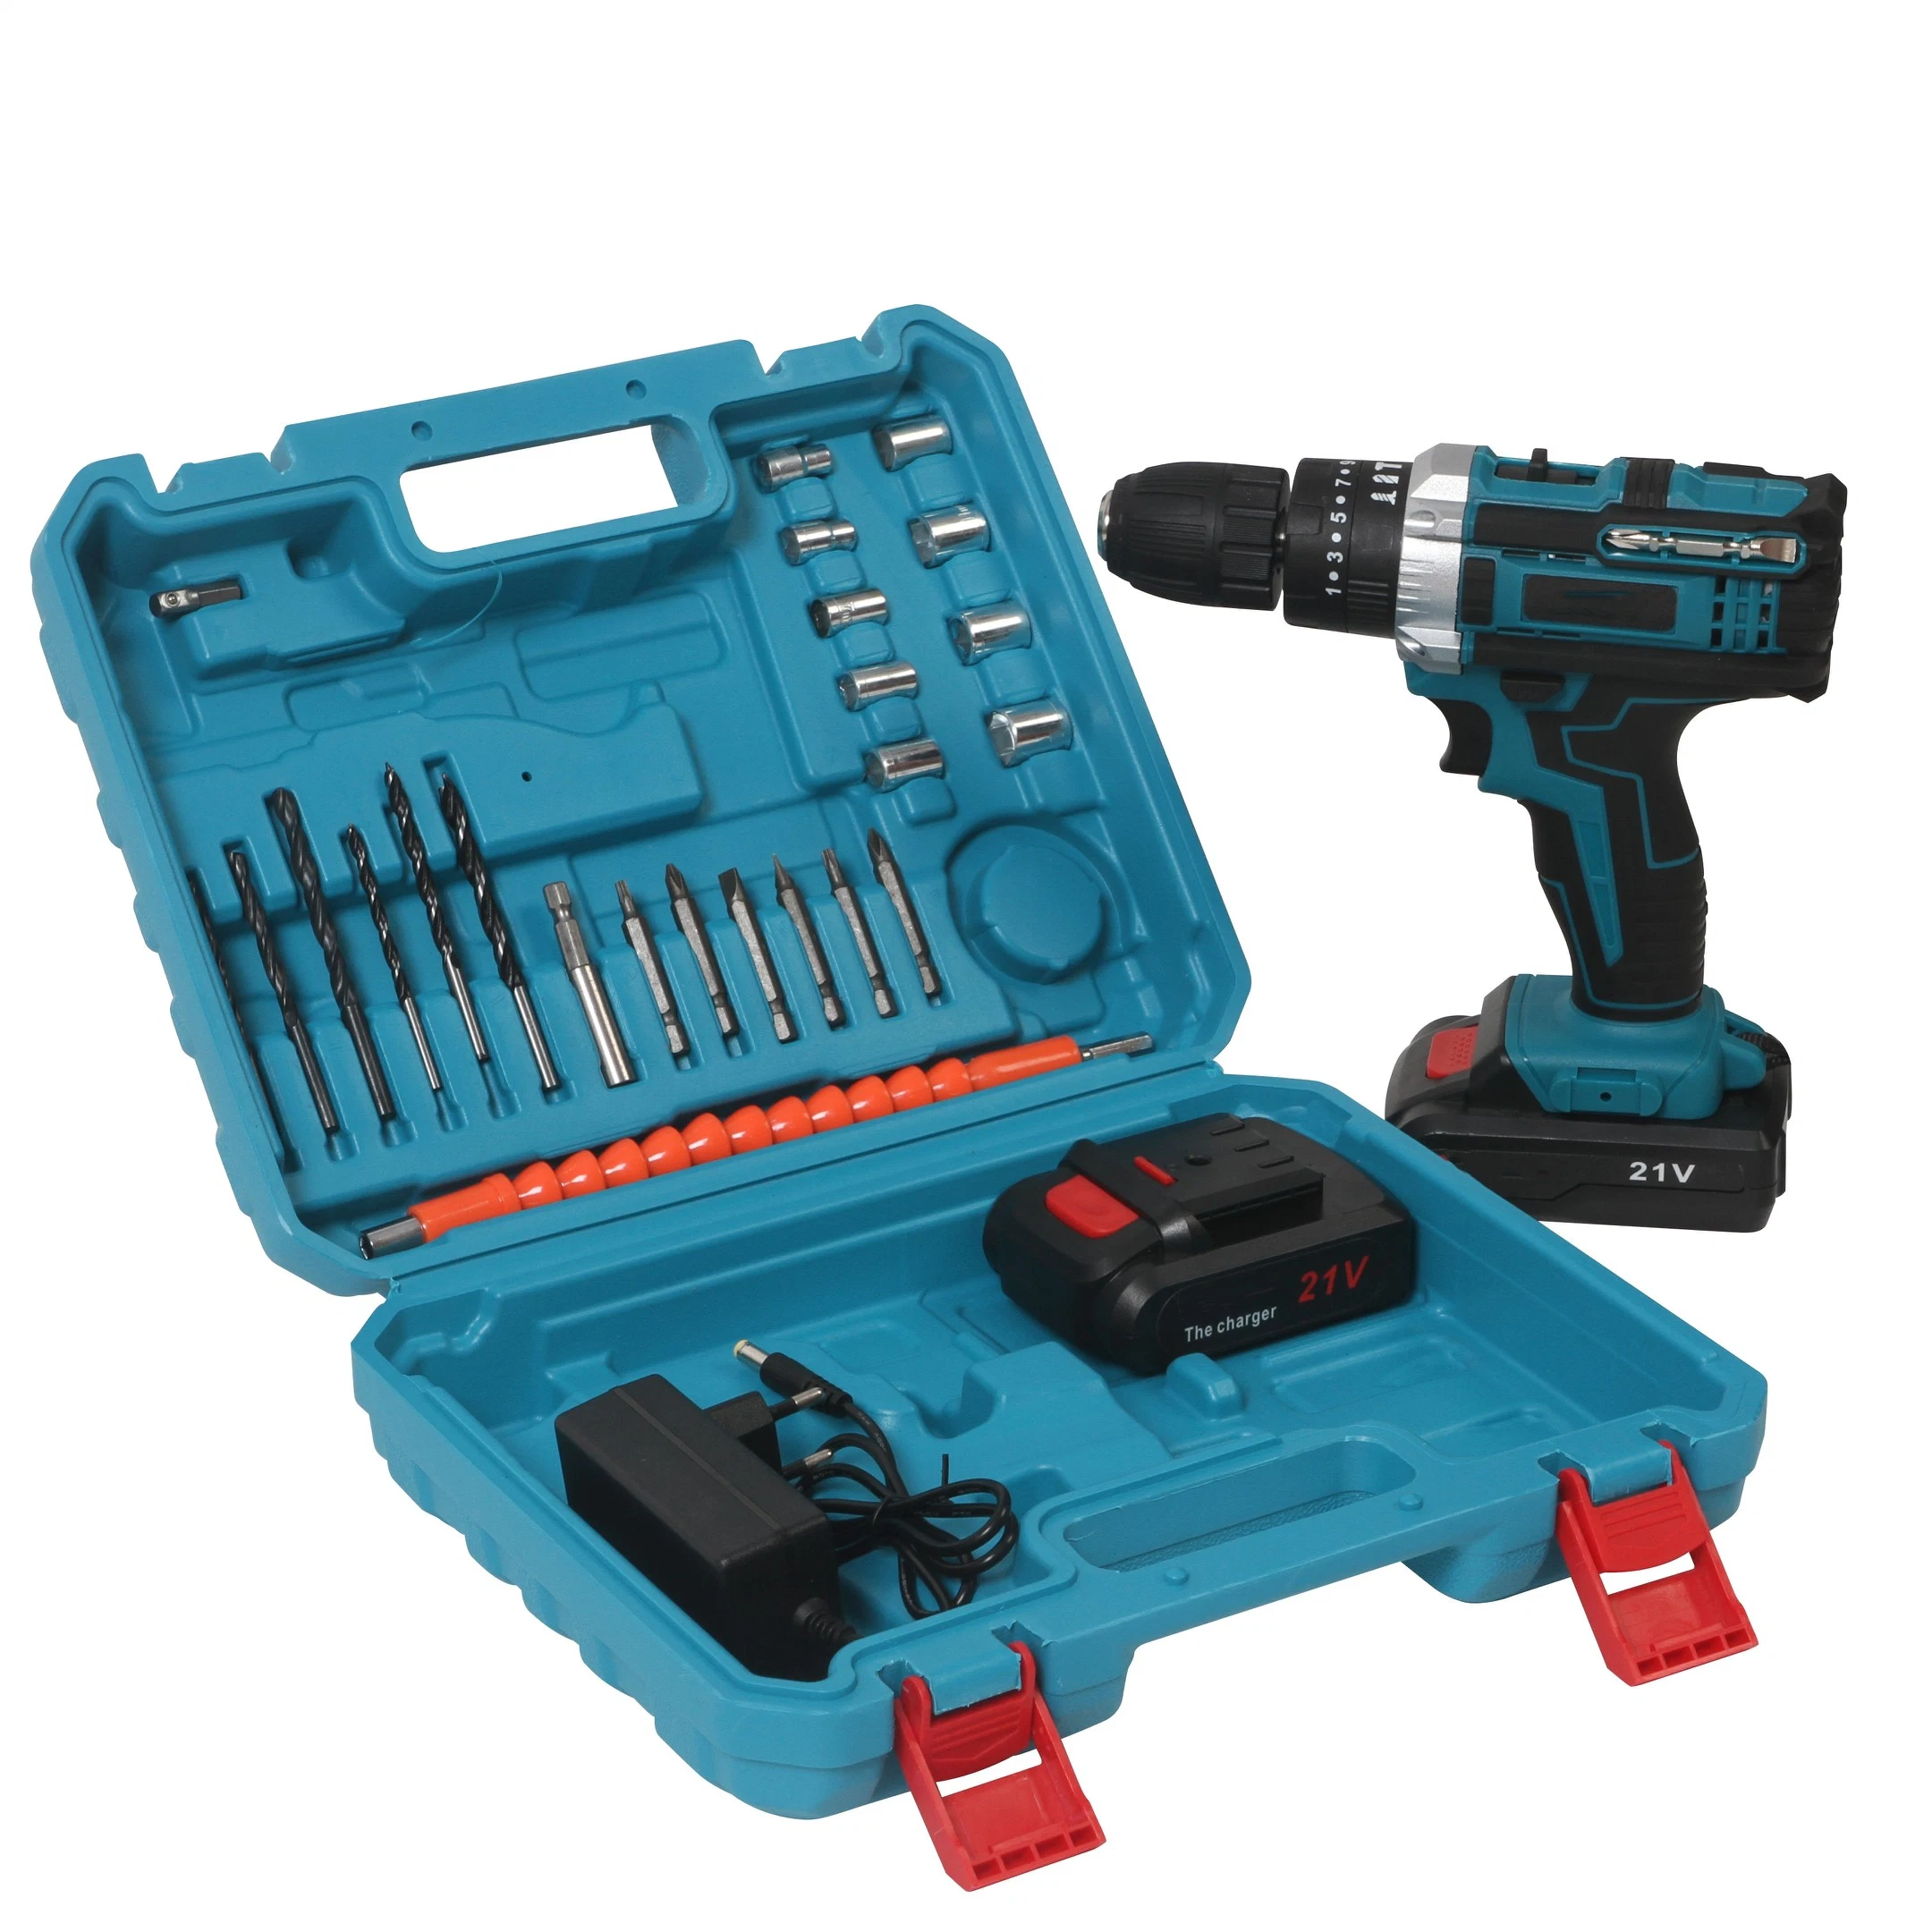 21V Electric Screw Driver Impact Power Tool Cordless Hammer Drill Sets